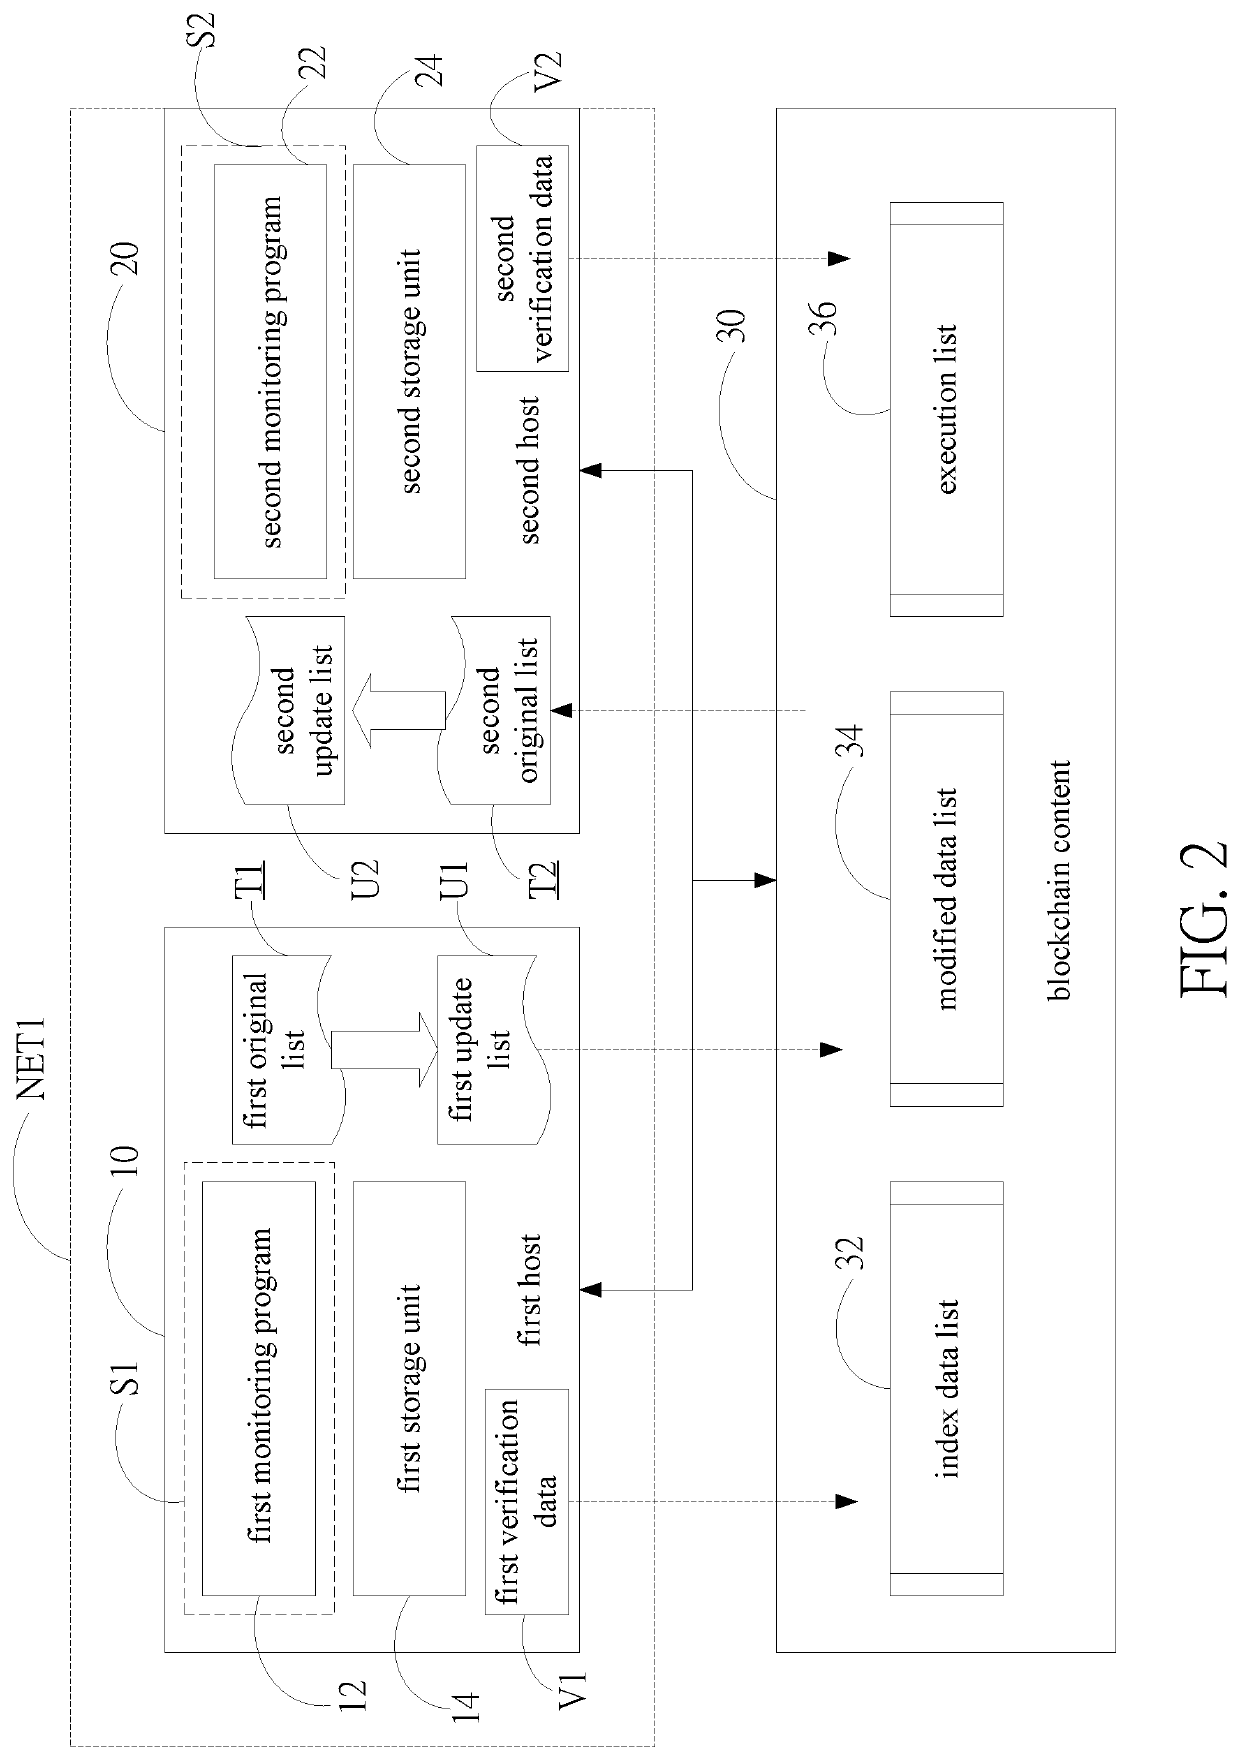 Method of synchronous deletion for distributed storage system